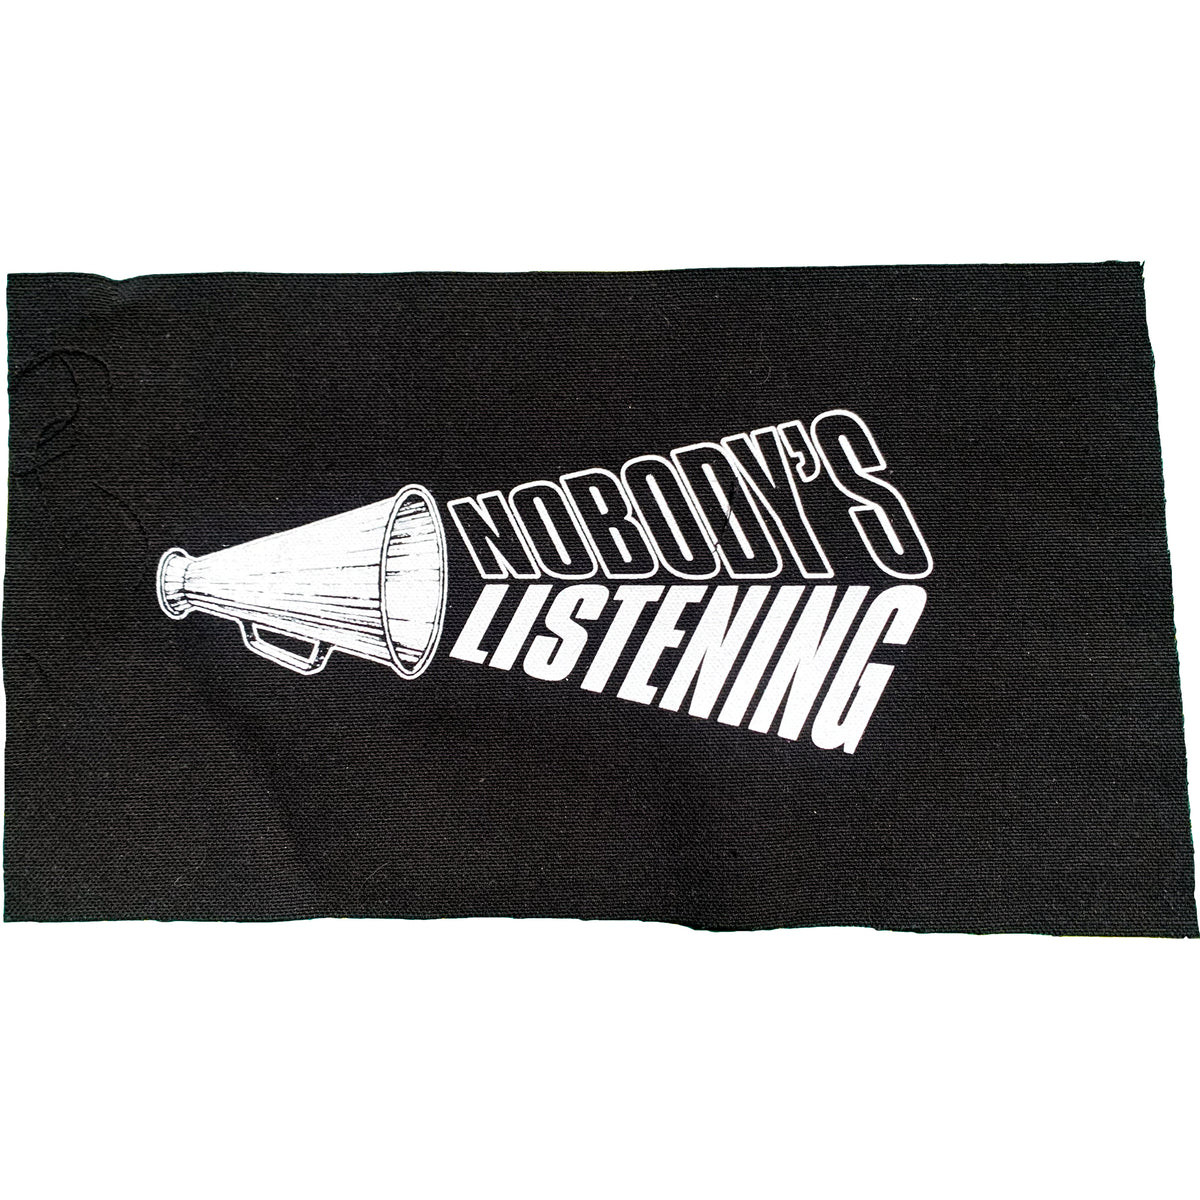 The Slackers - Nobody&#39;s Listening - Black - Patch - Cloth - Screenprinted - 8&quot; x 4&quot;